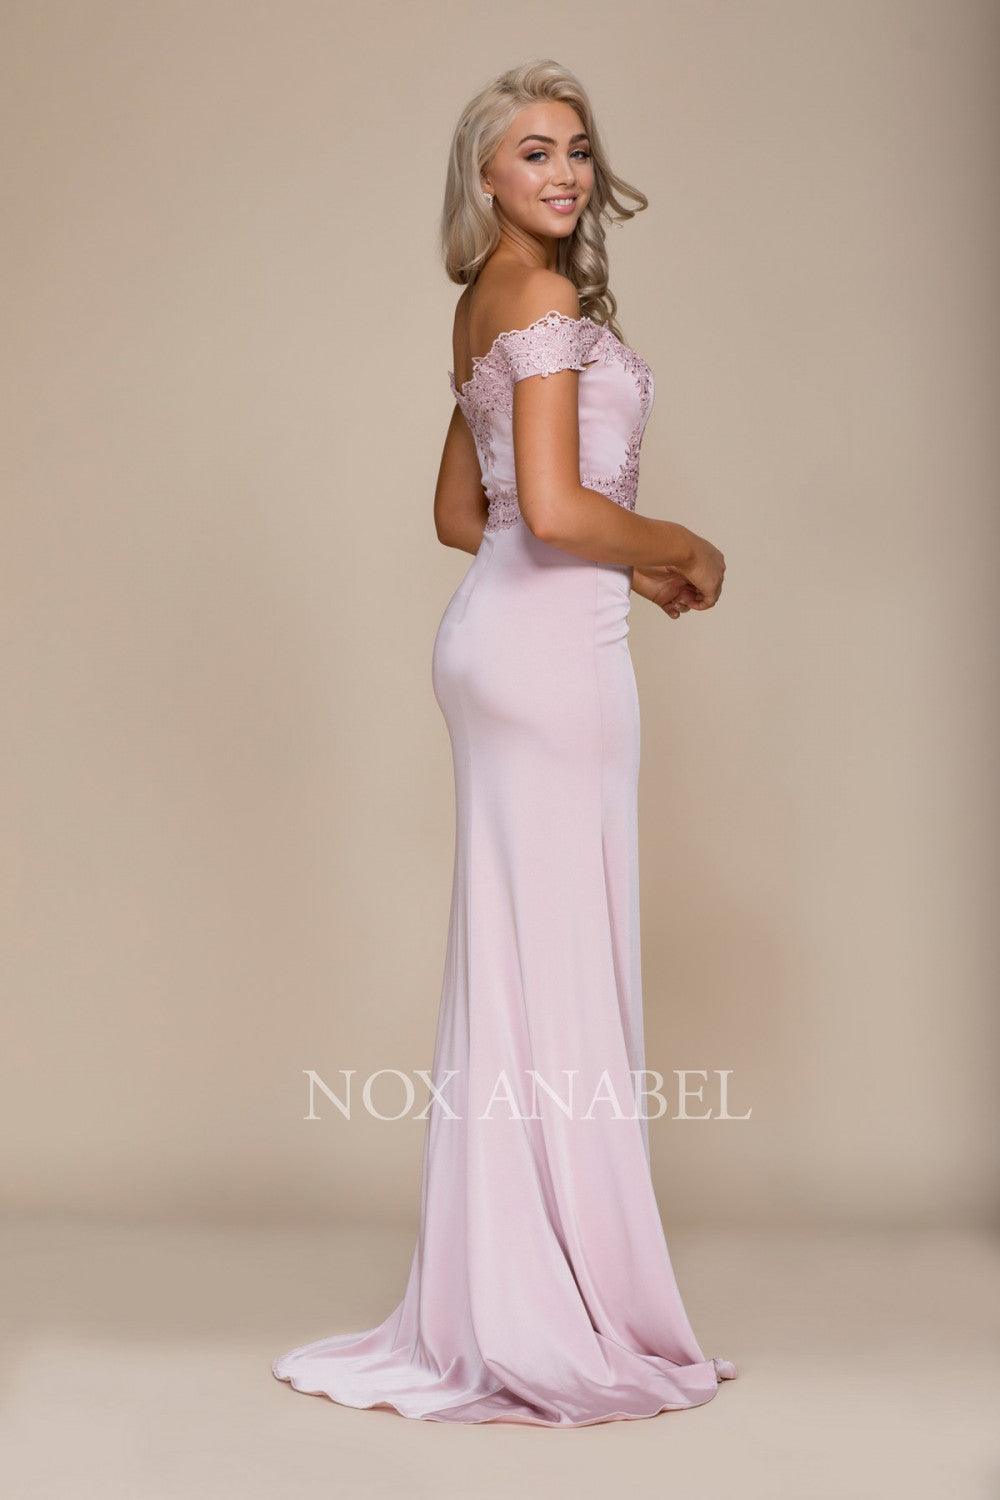 Long Off The Shoulder Embroidered Prom Dress - The Dress Outlet Nox Anabel